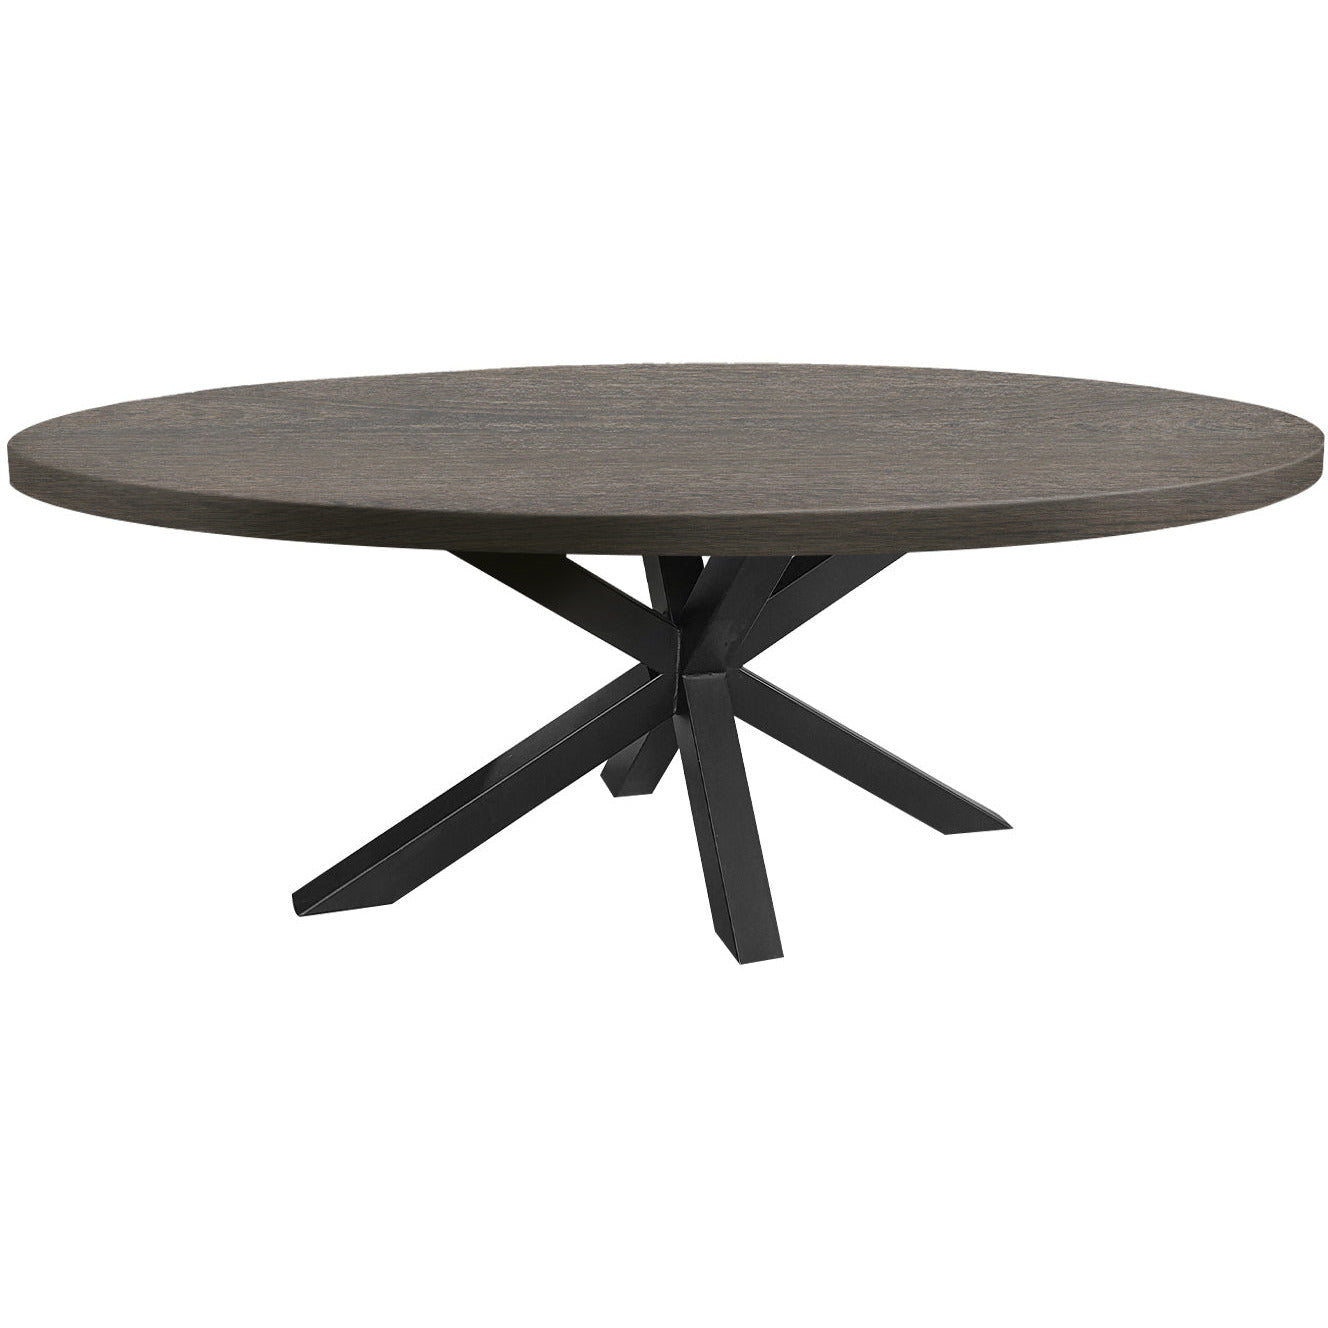 Dining table | Oval | Smoked | Oak wood | Lacquered | Spiderpaw